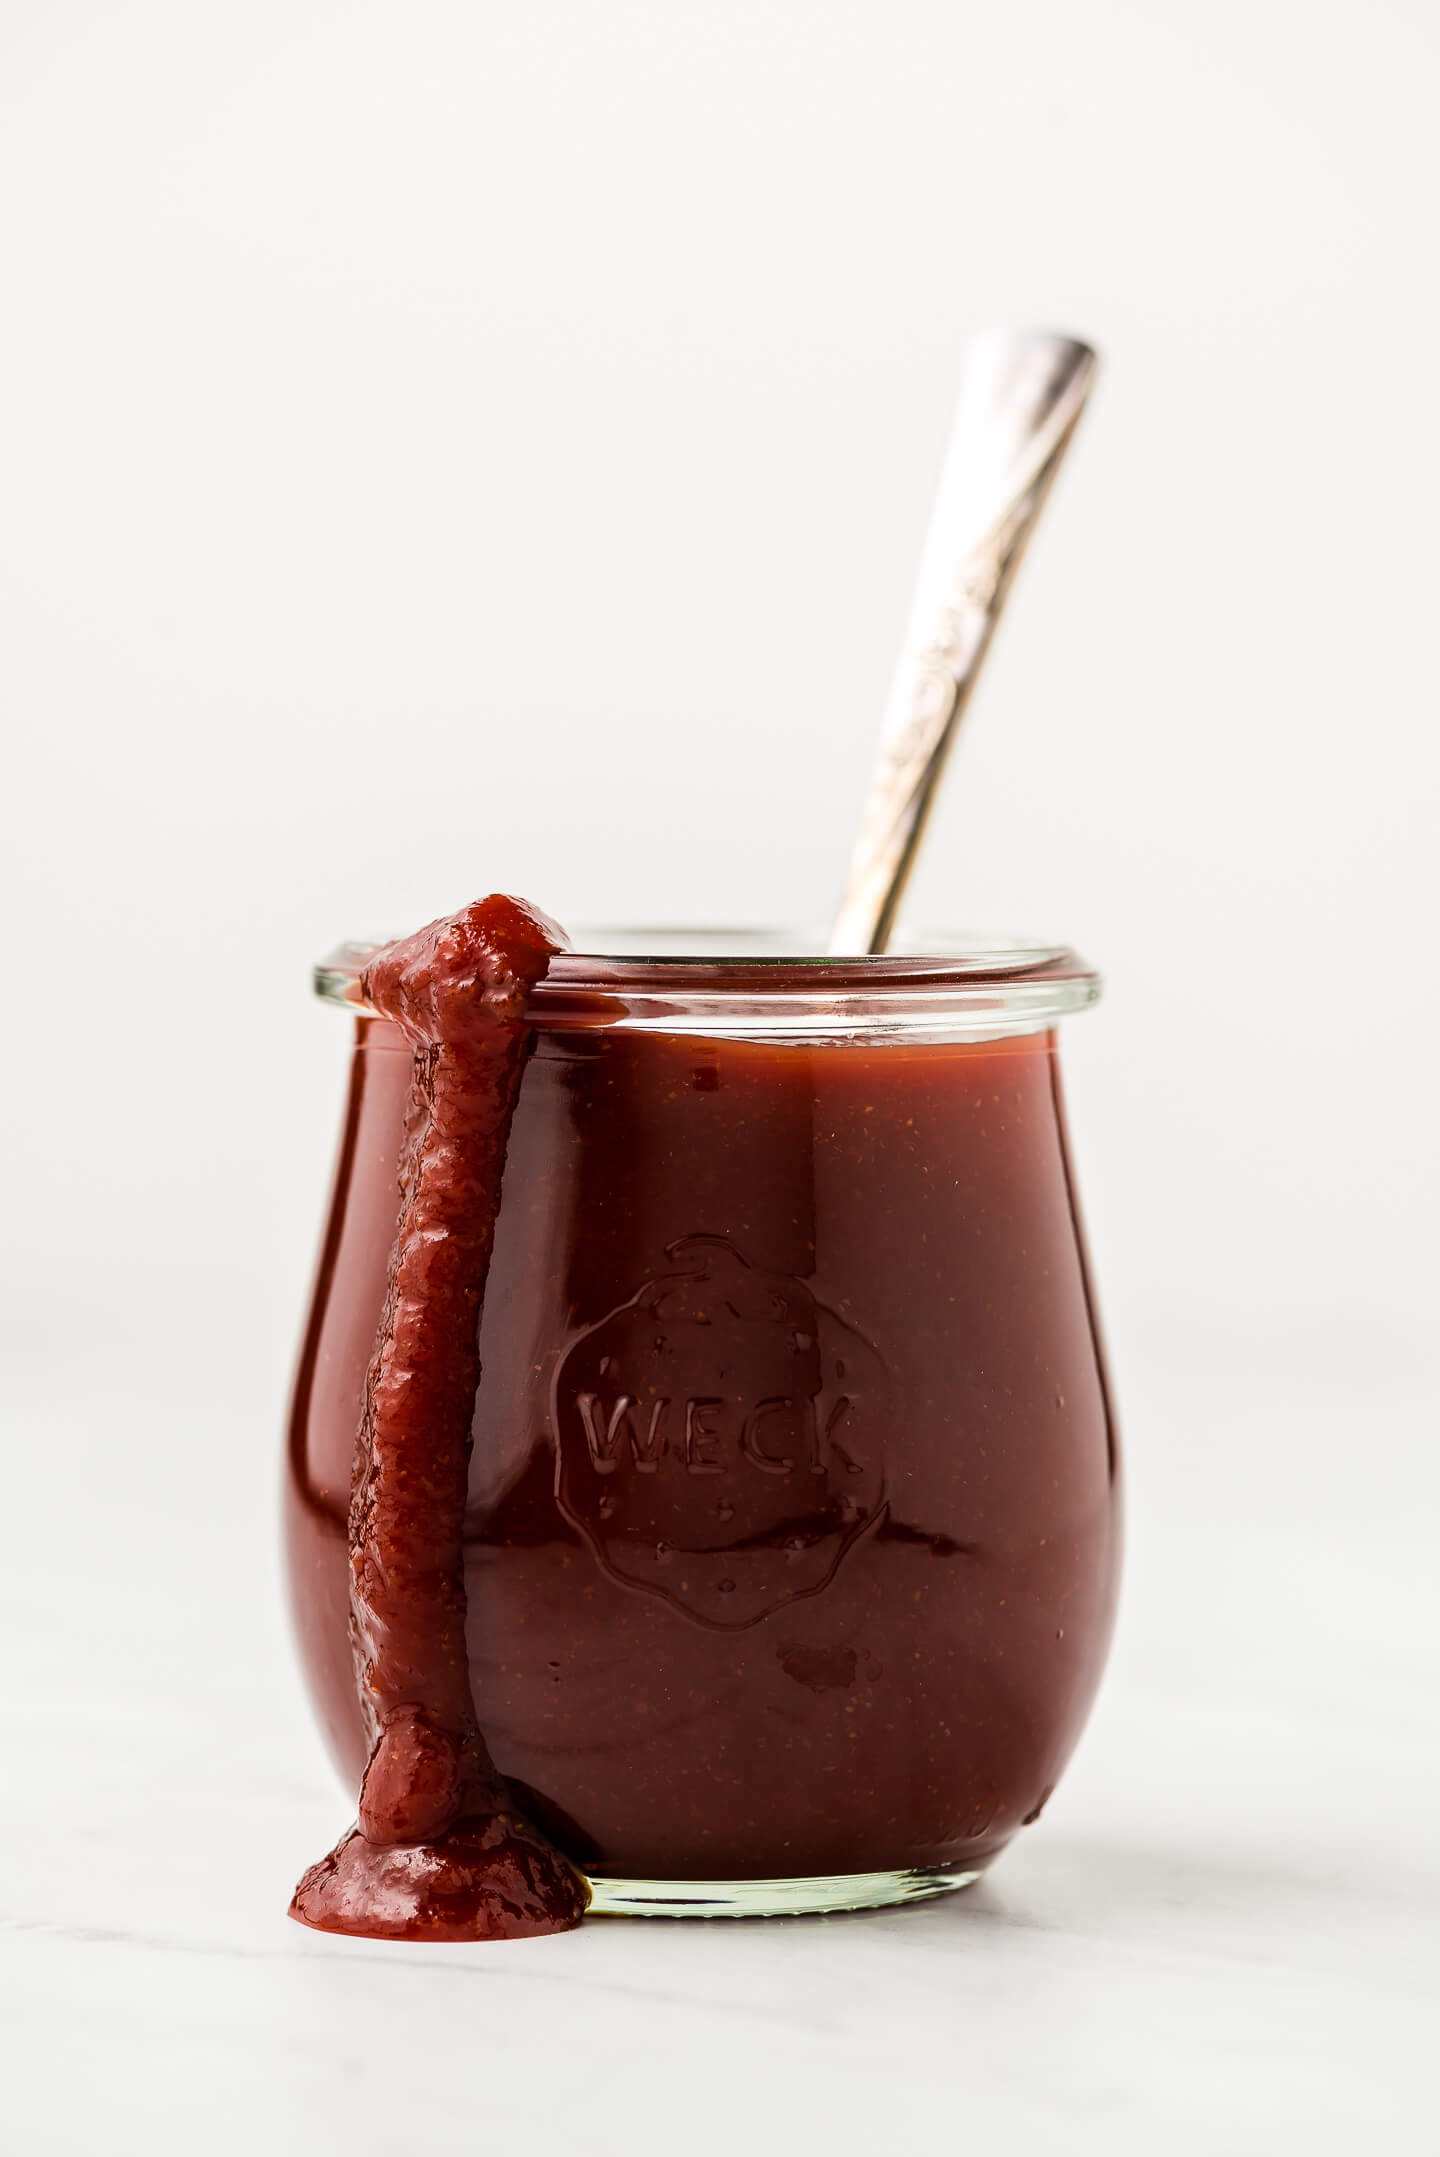 A jar of homemade barbecue sauce with some dripping down the side of the jar.